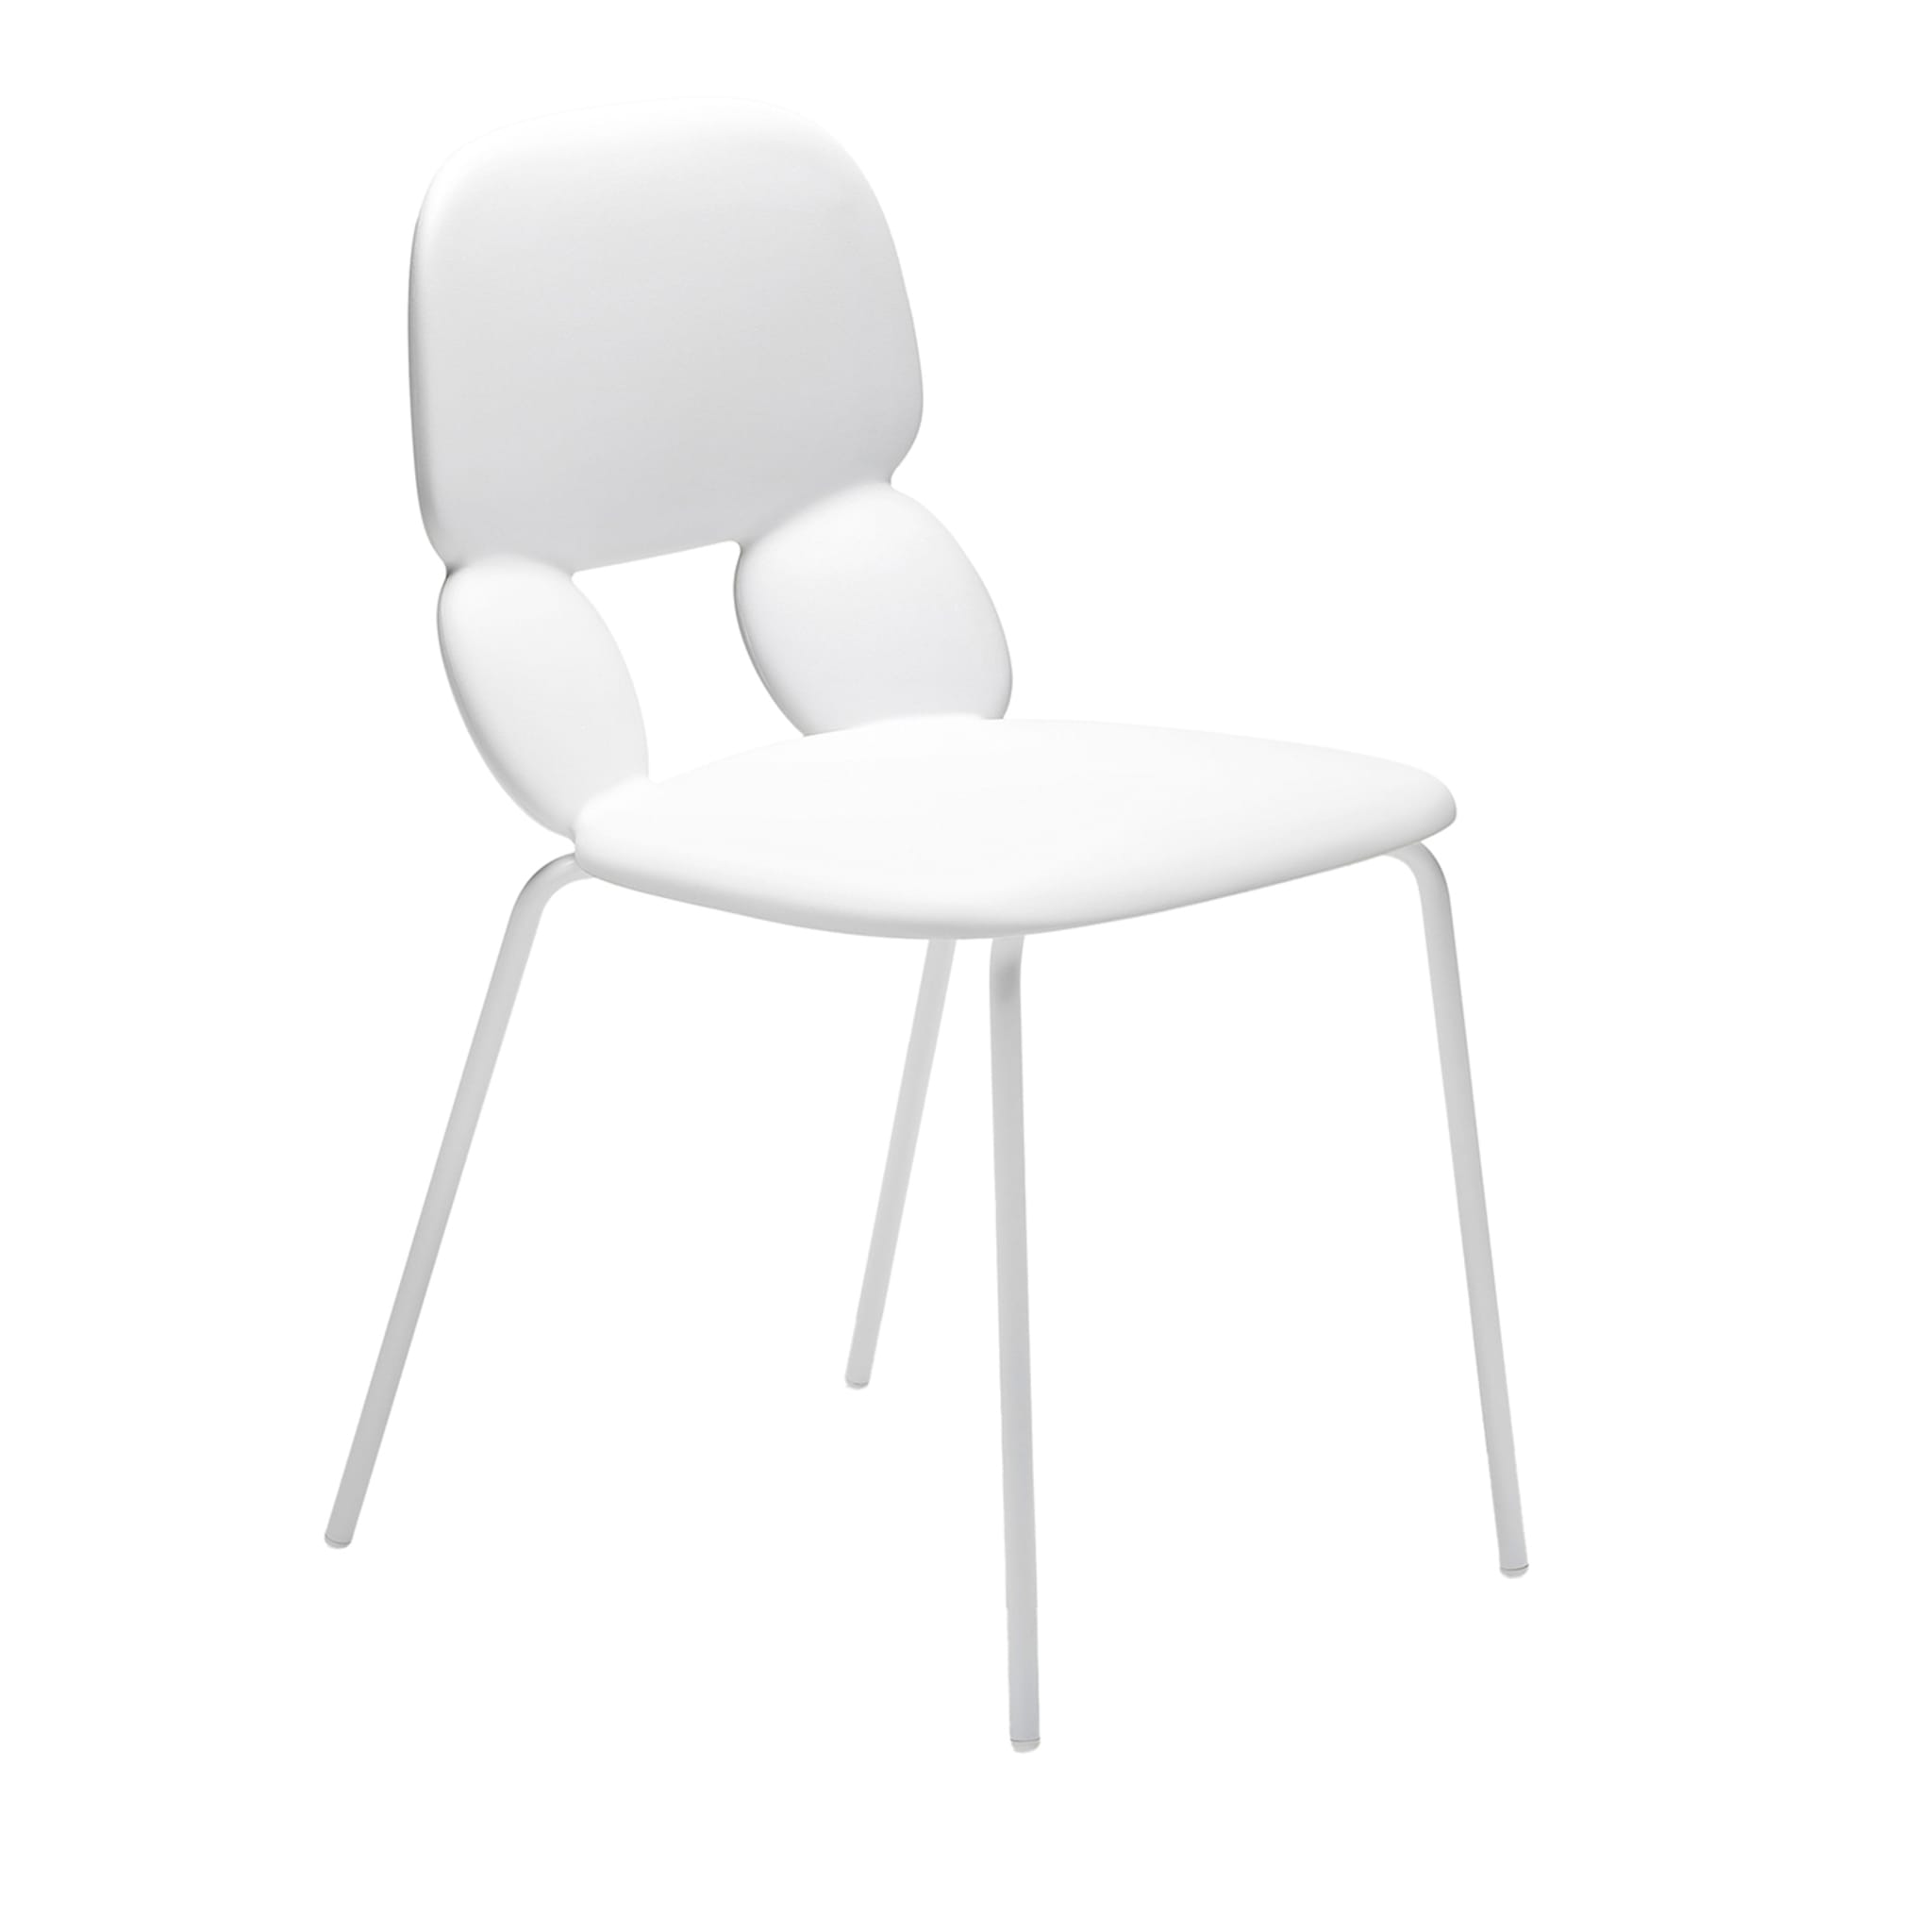 Nube S White Chair by Roberto Paoli - Main view